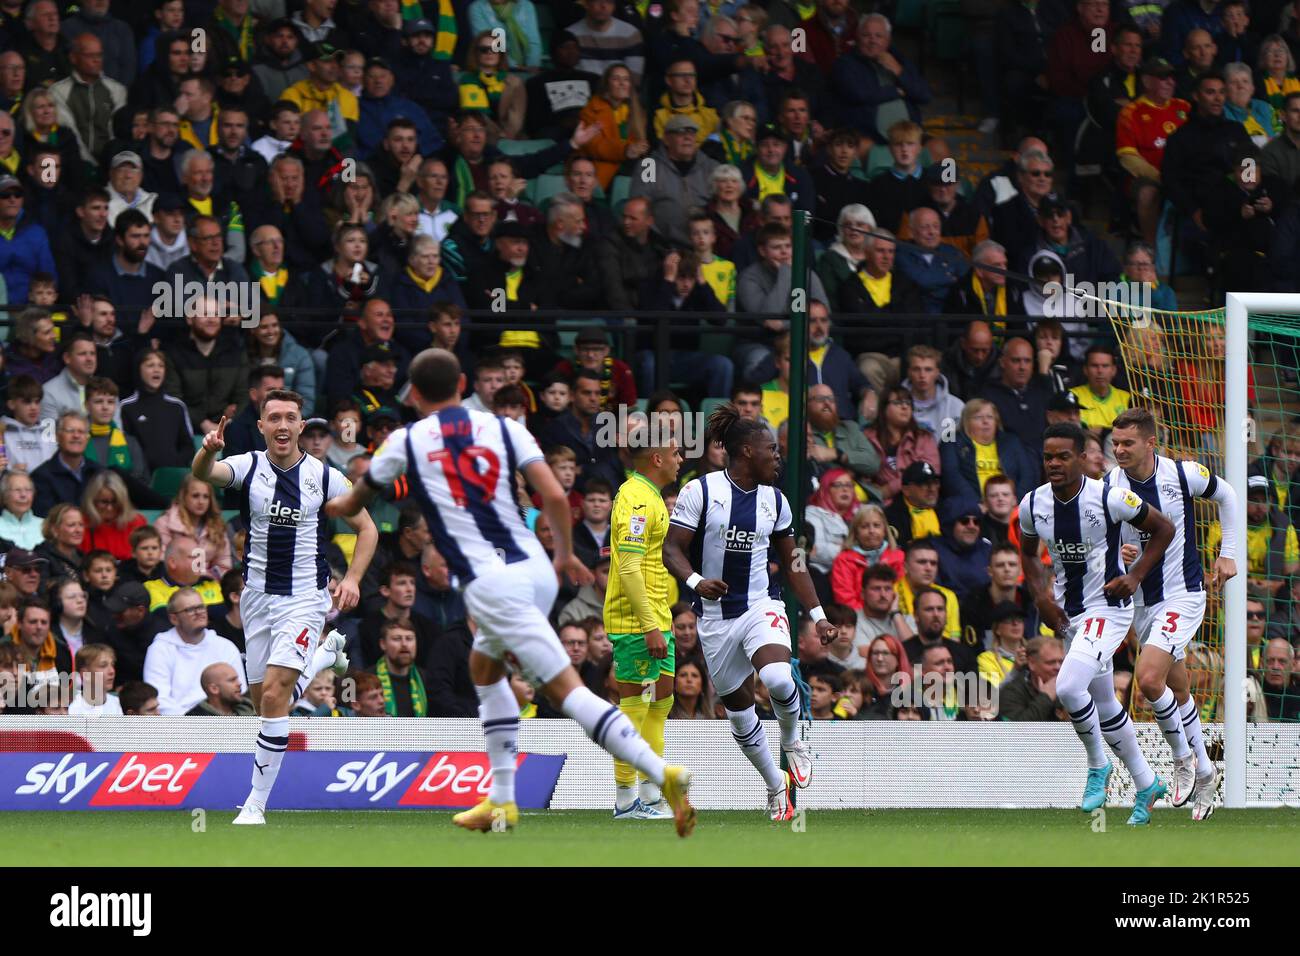 Dara O'Shea of West Bromwich Albion celebrates after scoring a goal to make it 1-0 - Norwich City v West Bromwich Albion, Sky Bet Championship, Carrow Road, Norwich, UK - 17th September 2022  Editorial Use Only - DataCo restrictions apply Stock Photo